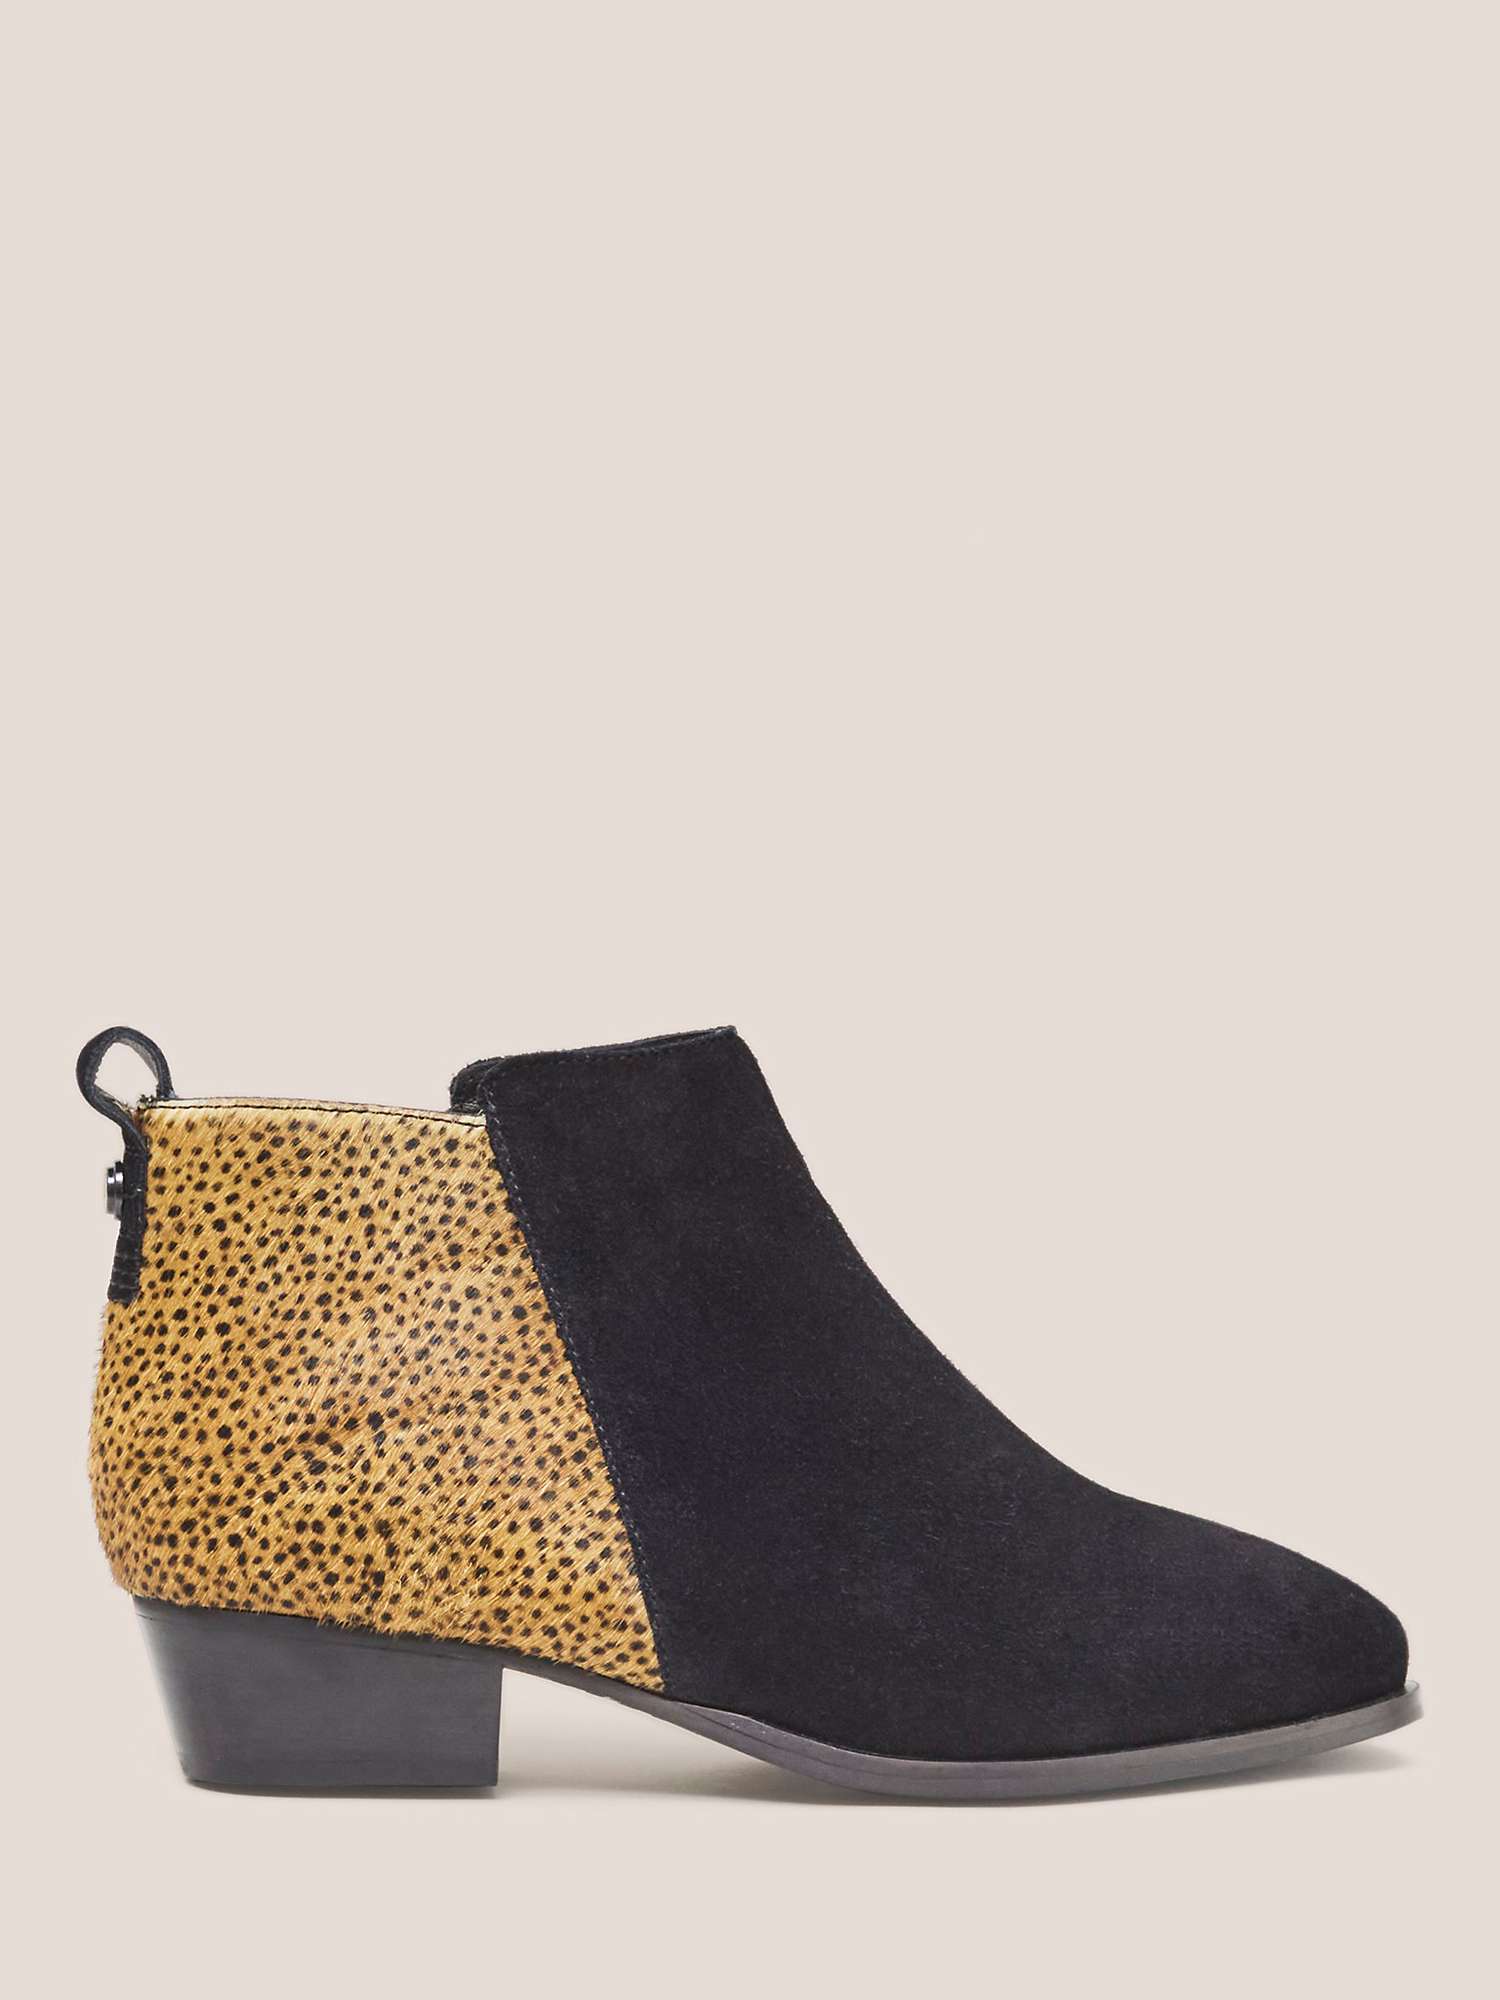 Buy White Stuff Willow Suede Pony Ankle Boots Online at johnlewis.com